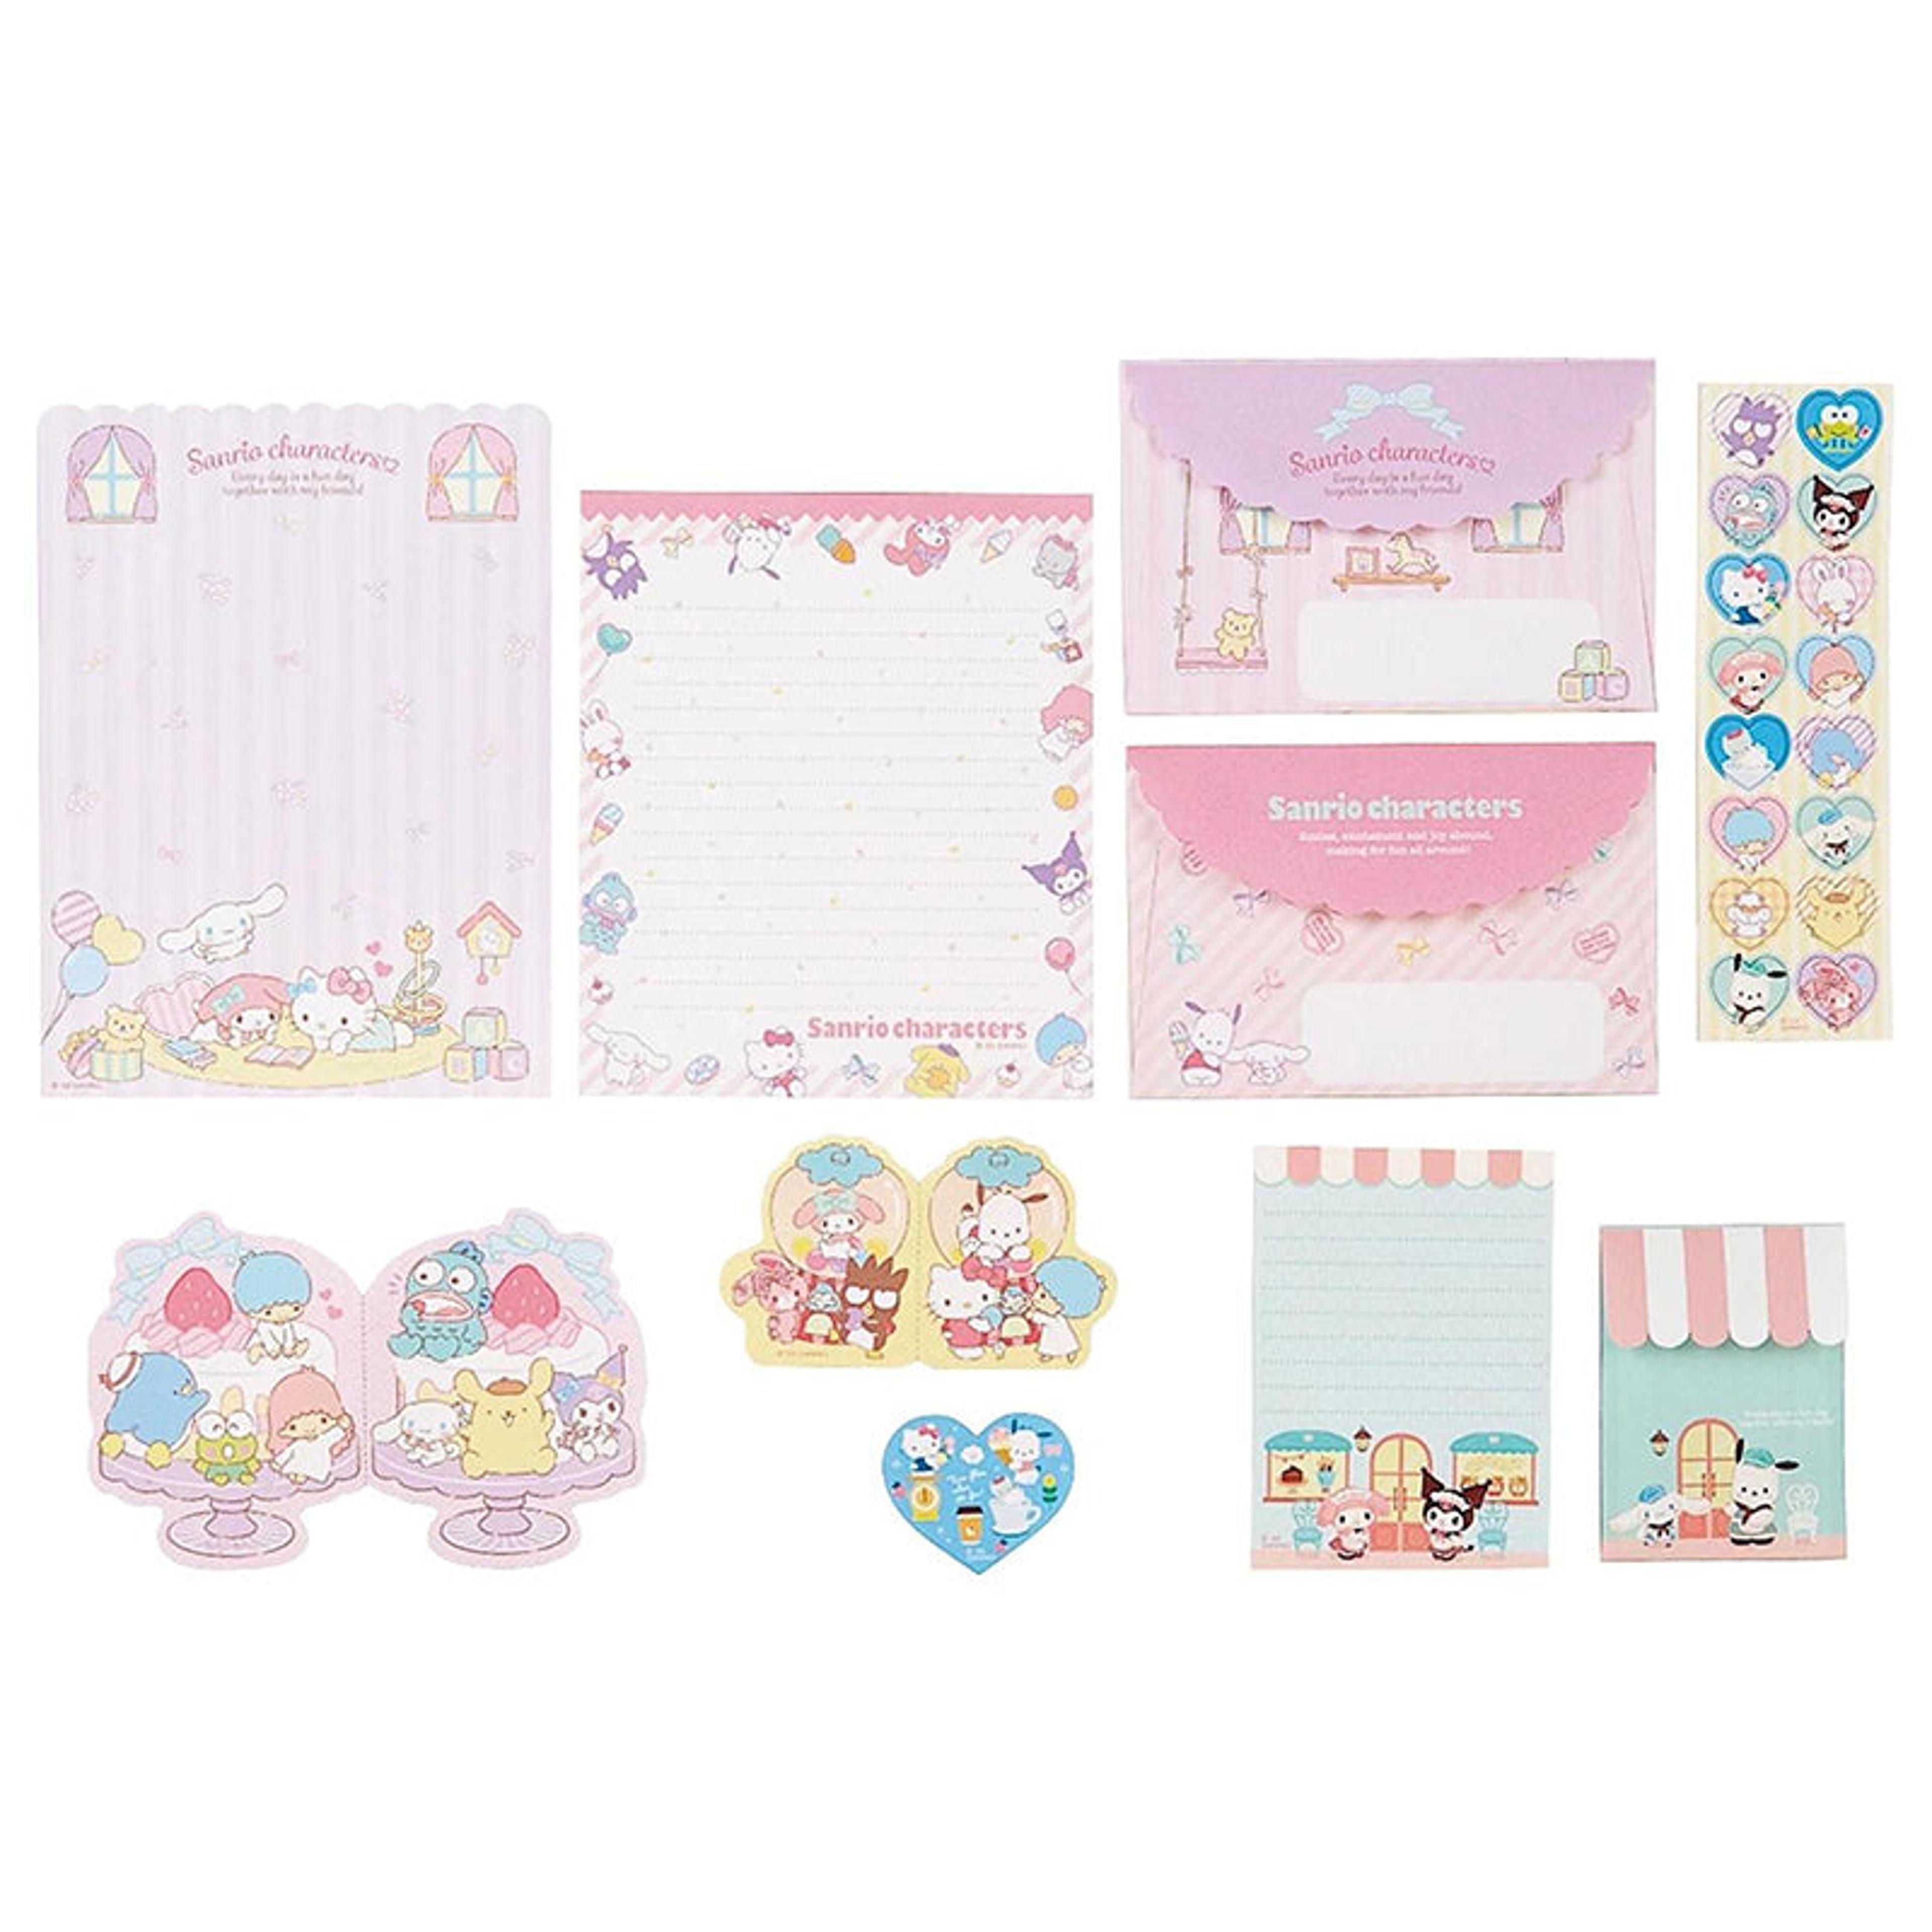 Alternate View 8 of Sanrio Character Variety Letter Set